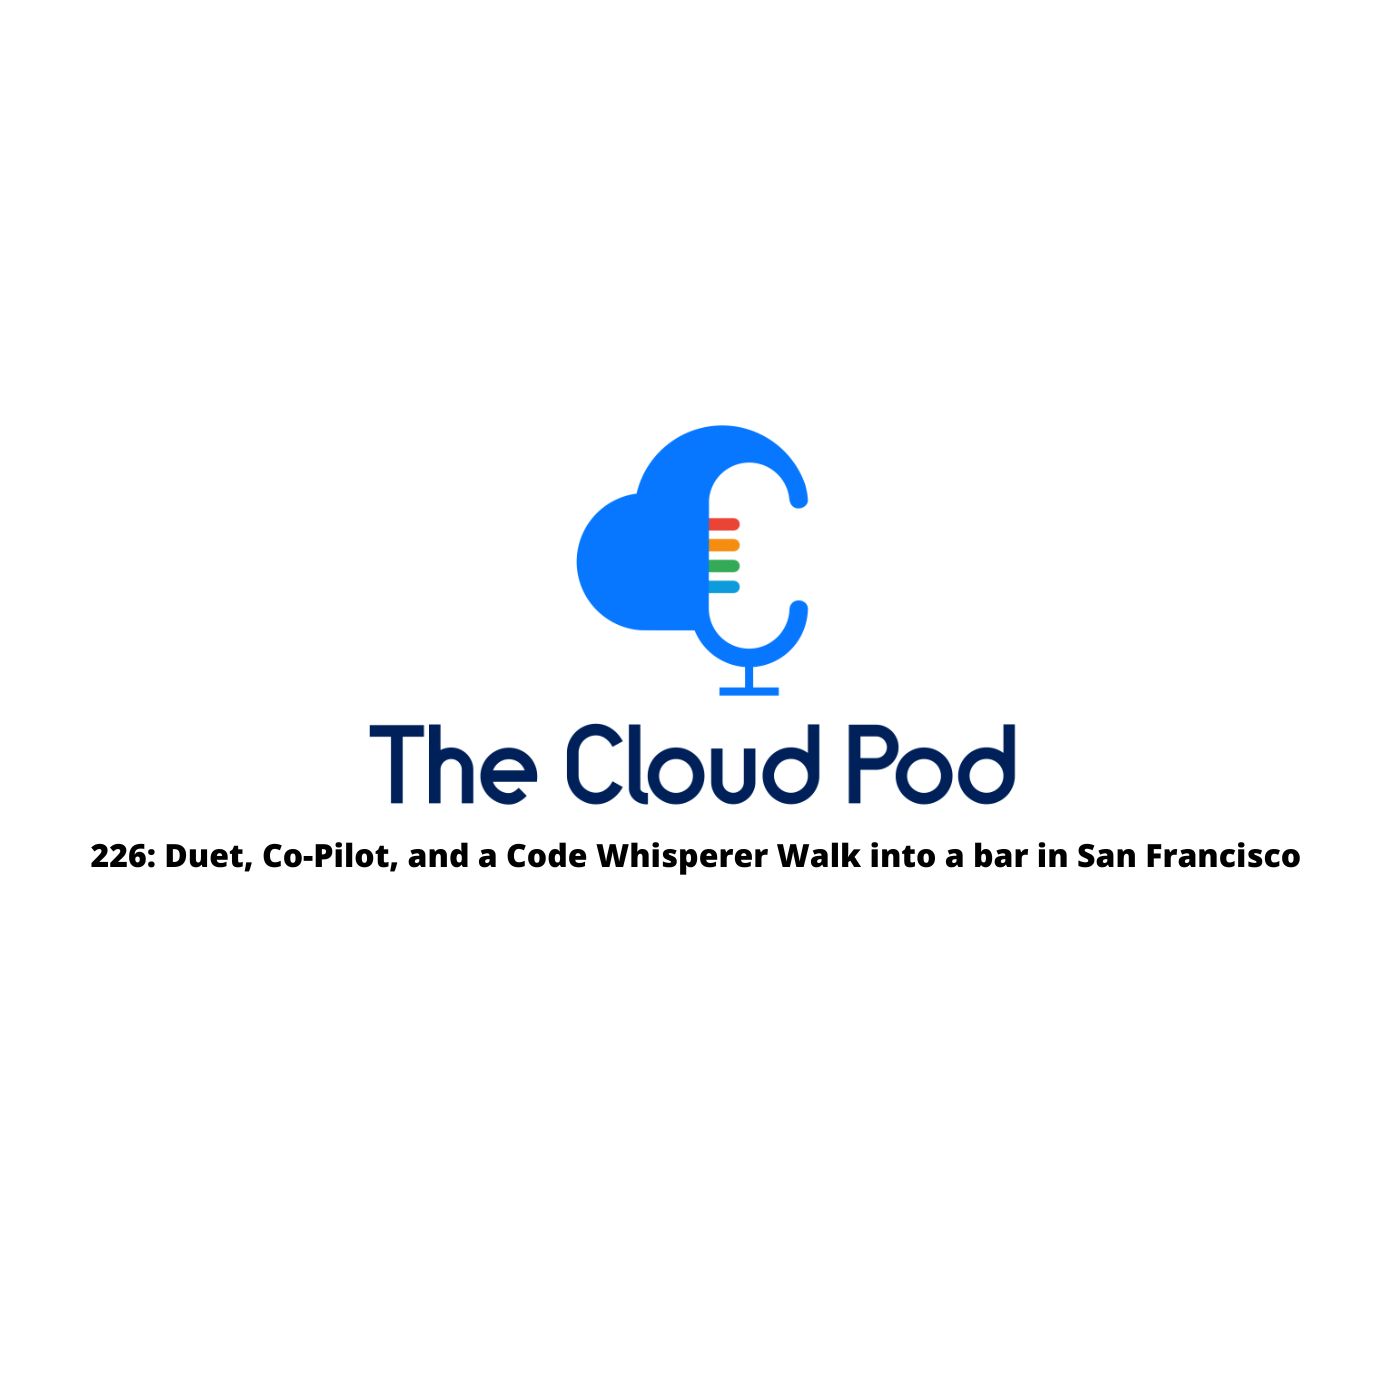 226: Duet, Co-Pilot, and a Code Whisperer Walk into a bar in San Francisco